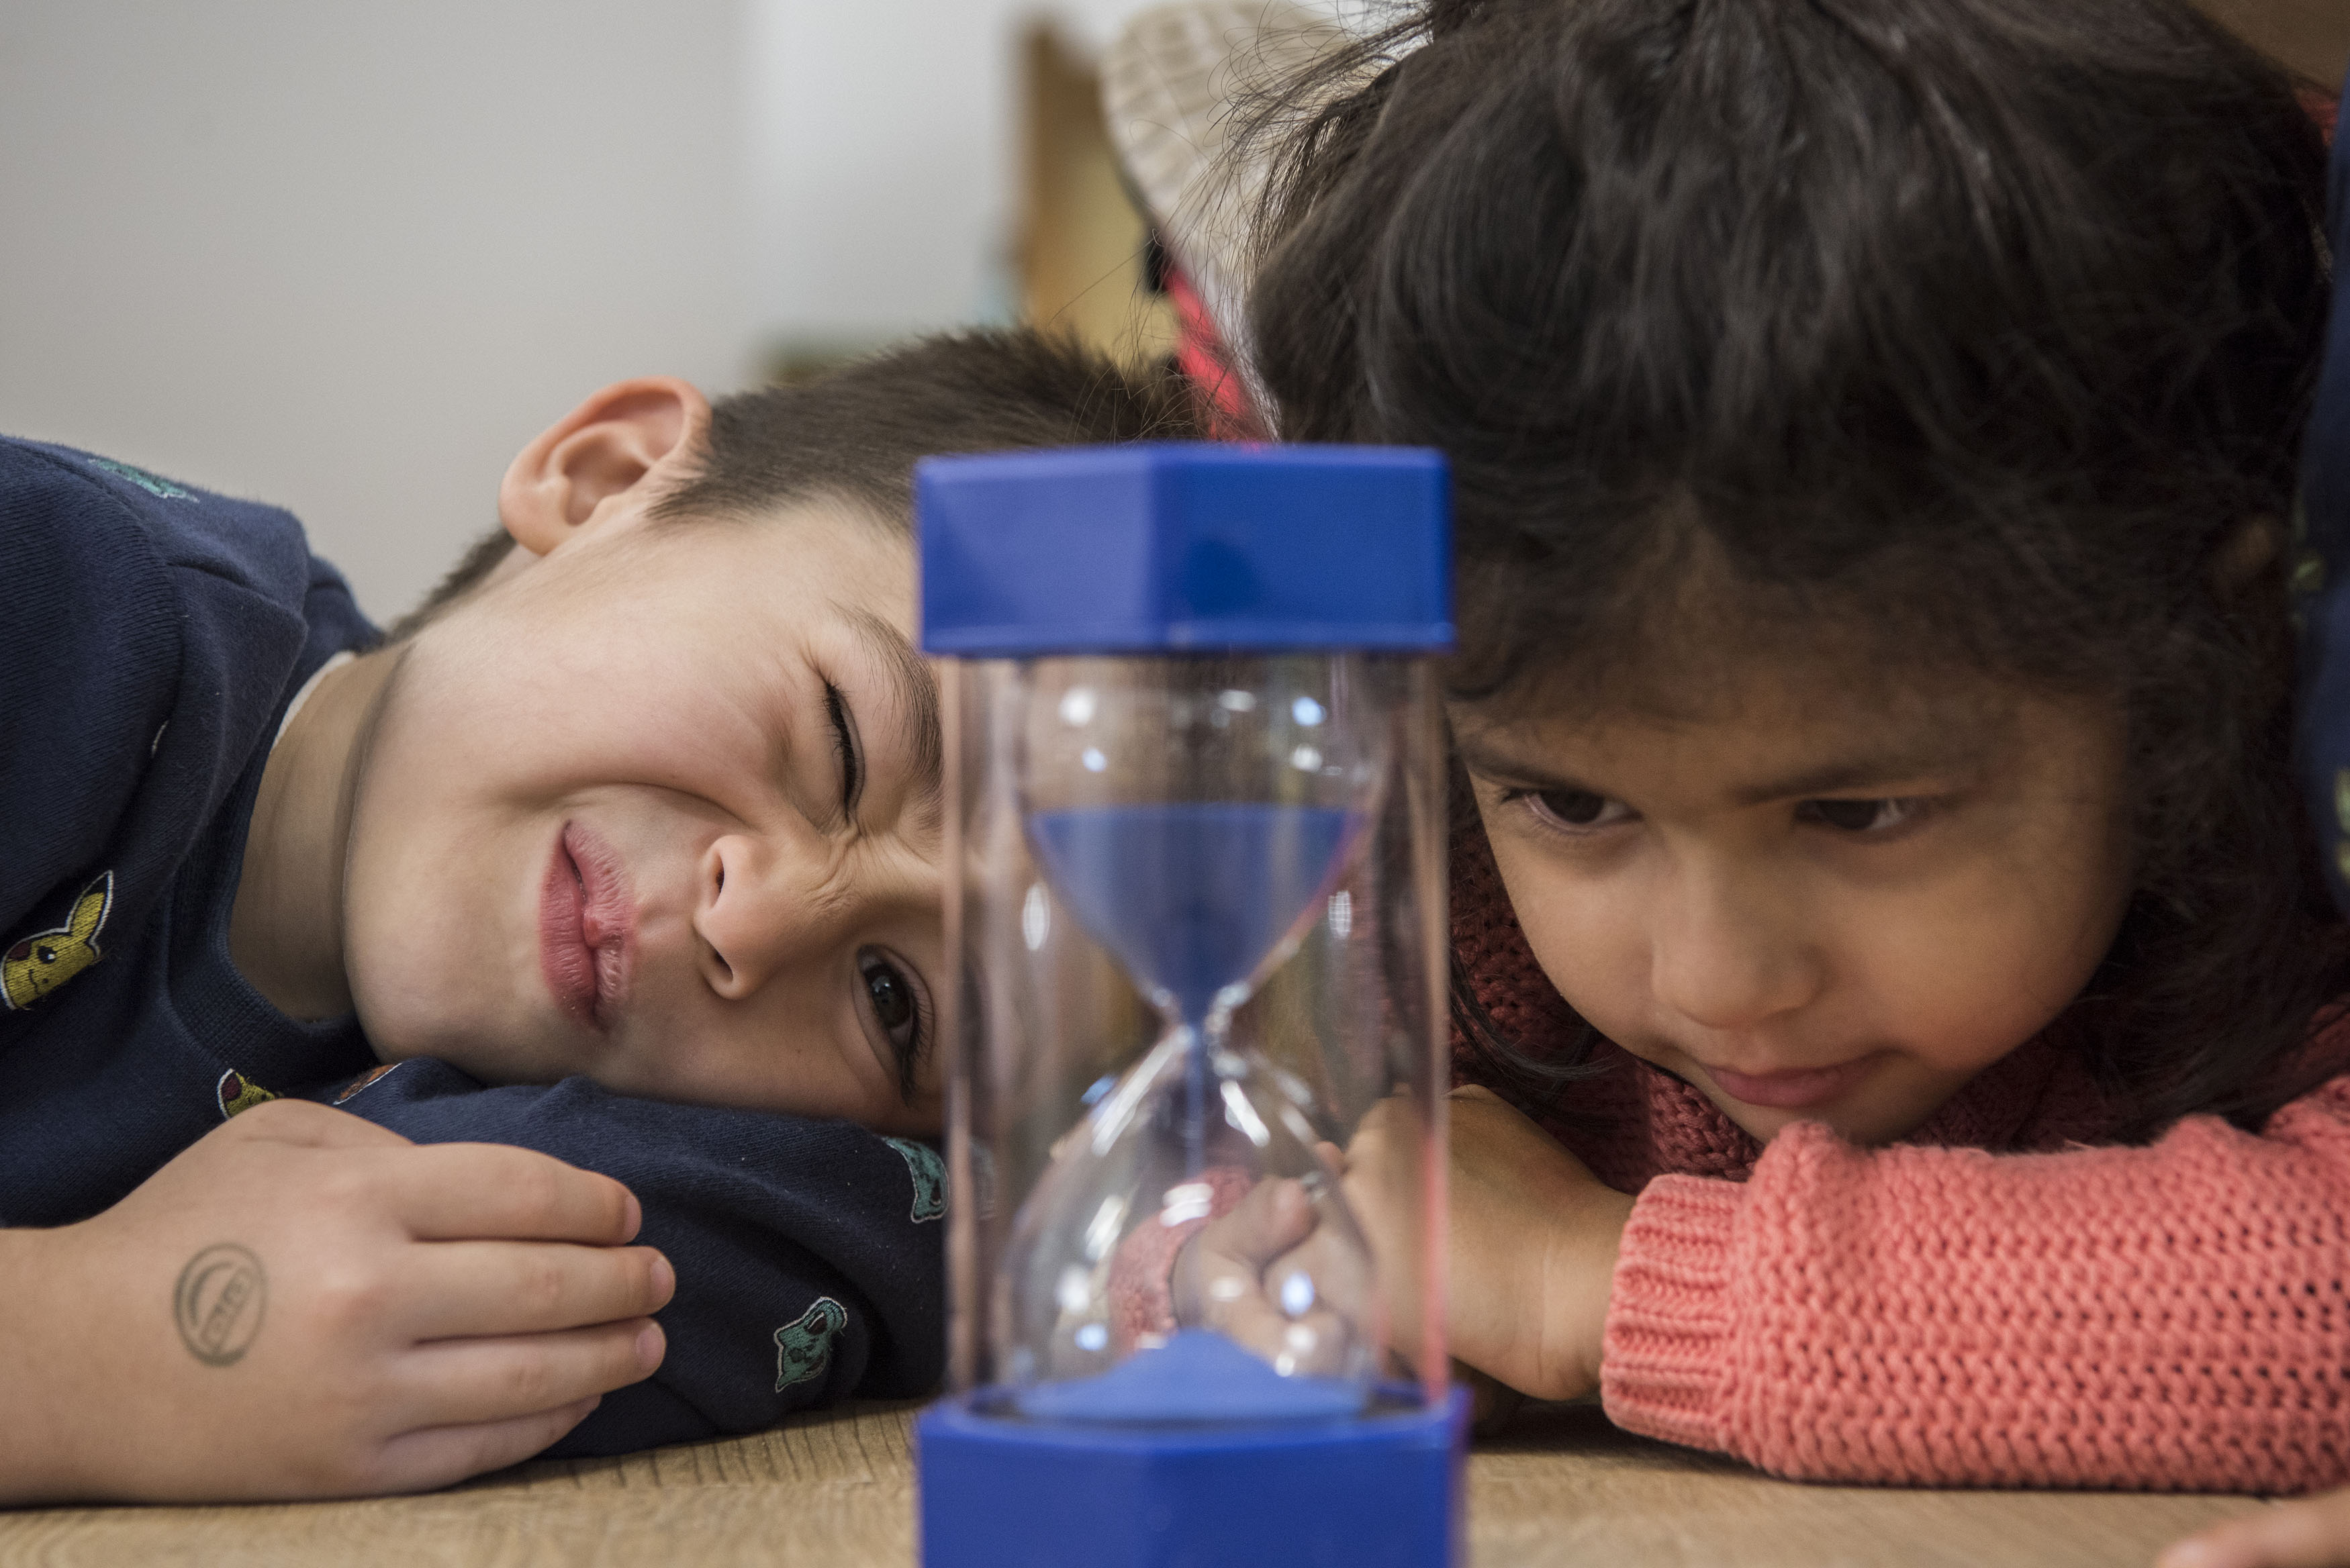 Two young children leaning on a table, looking closely at an hourglass